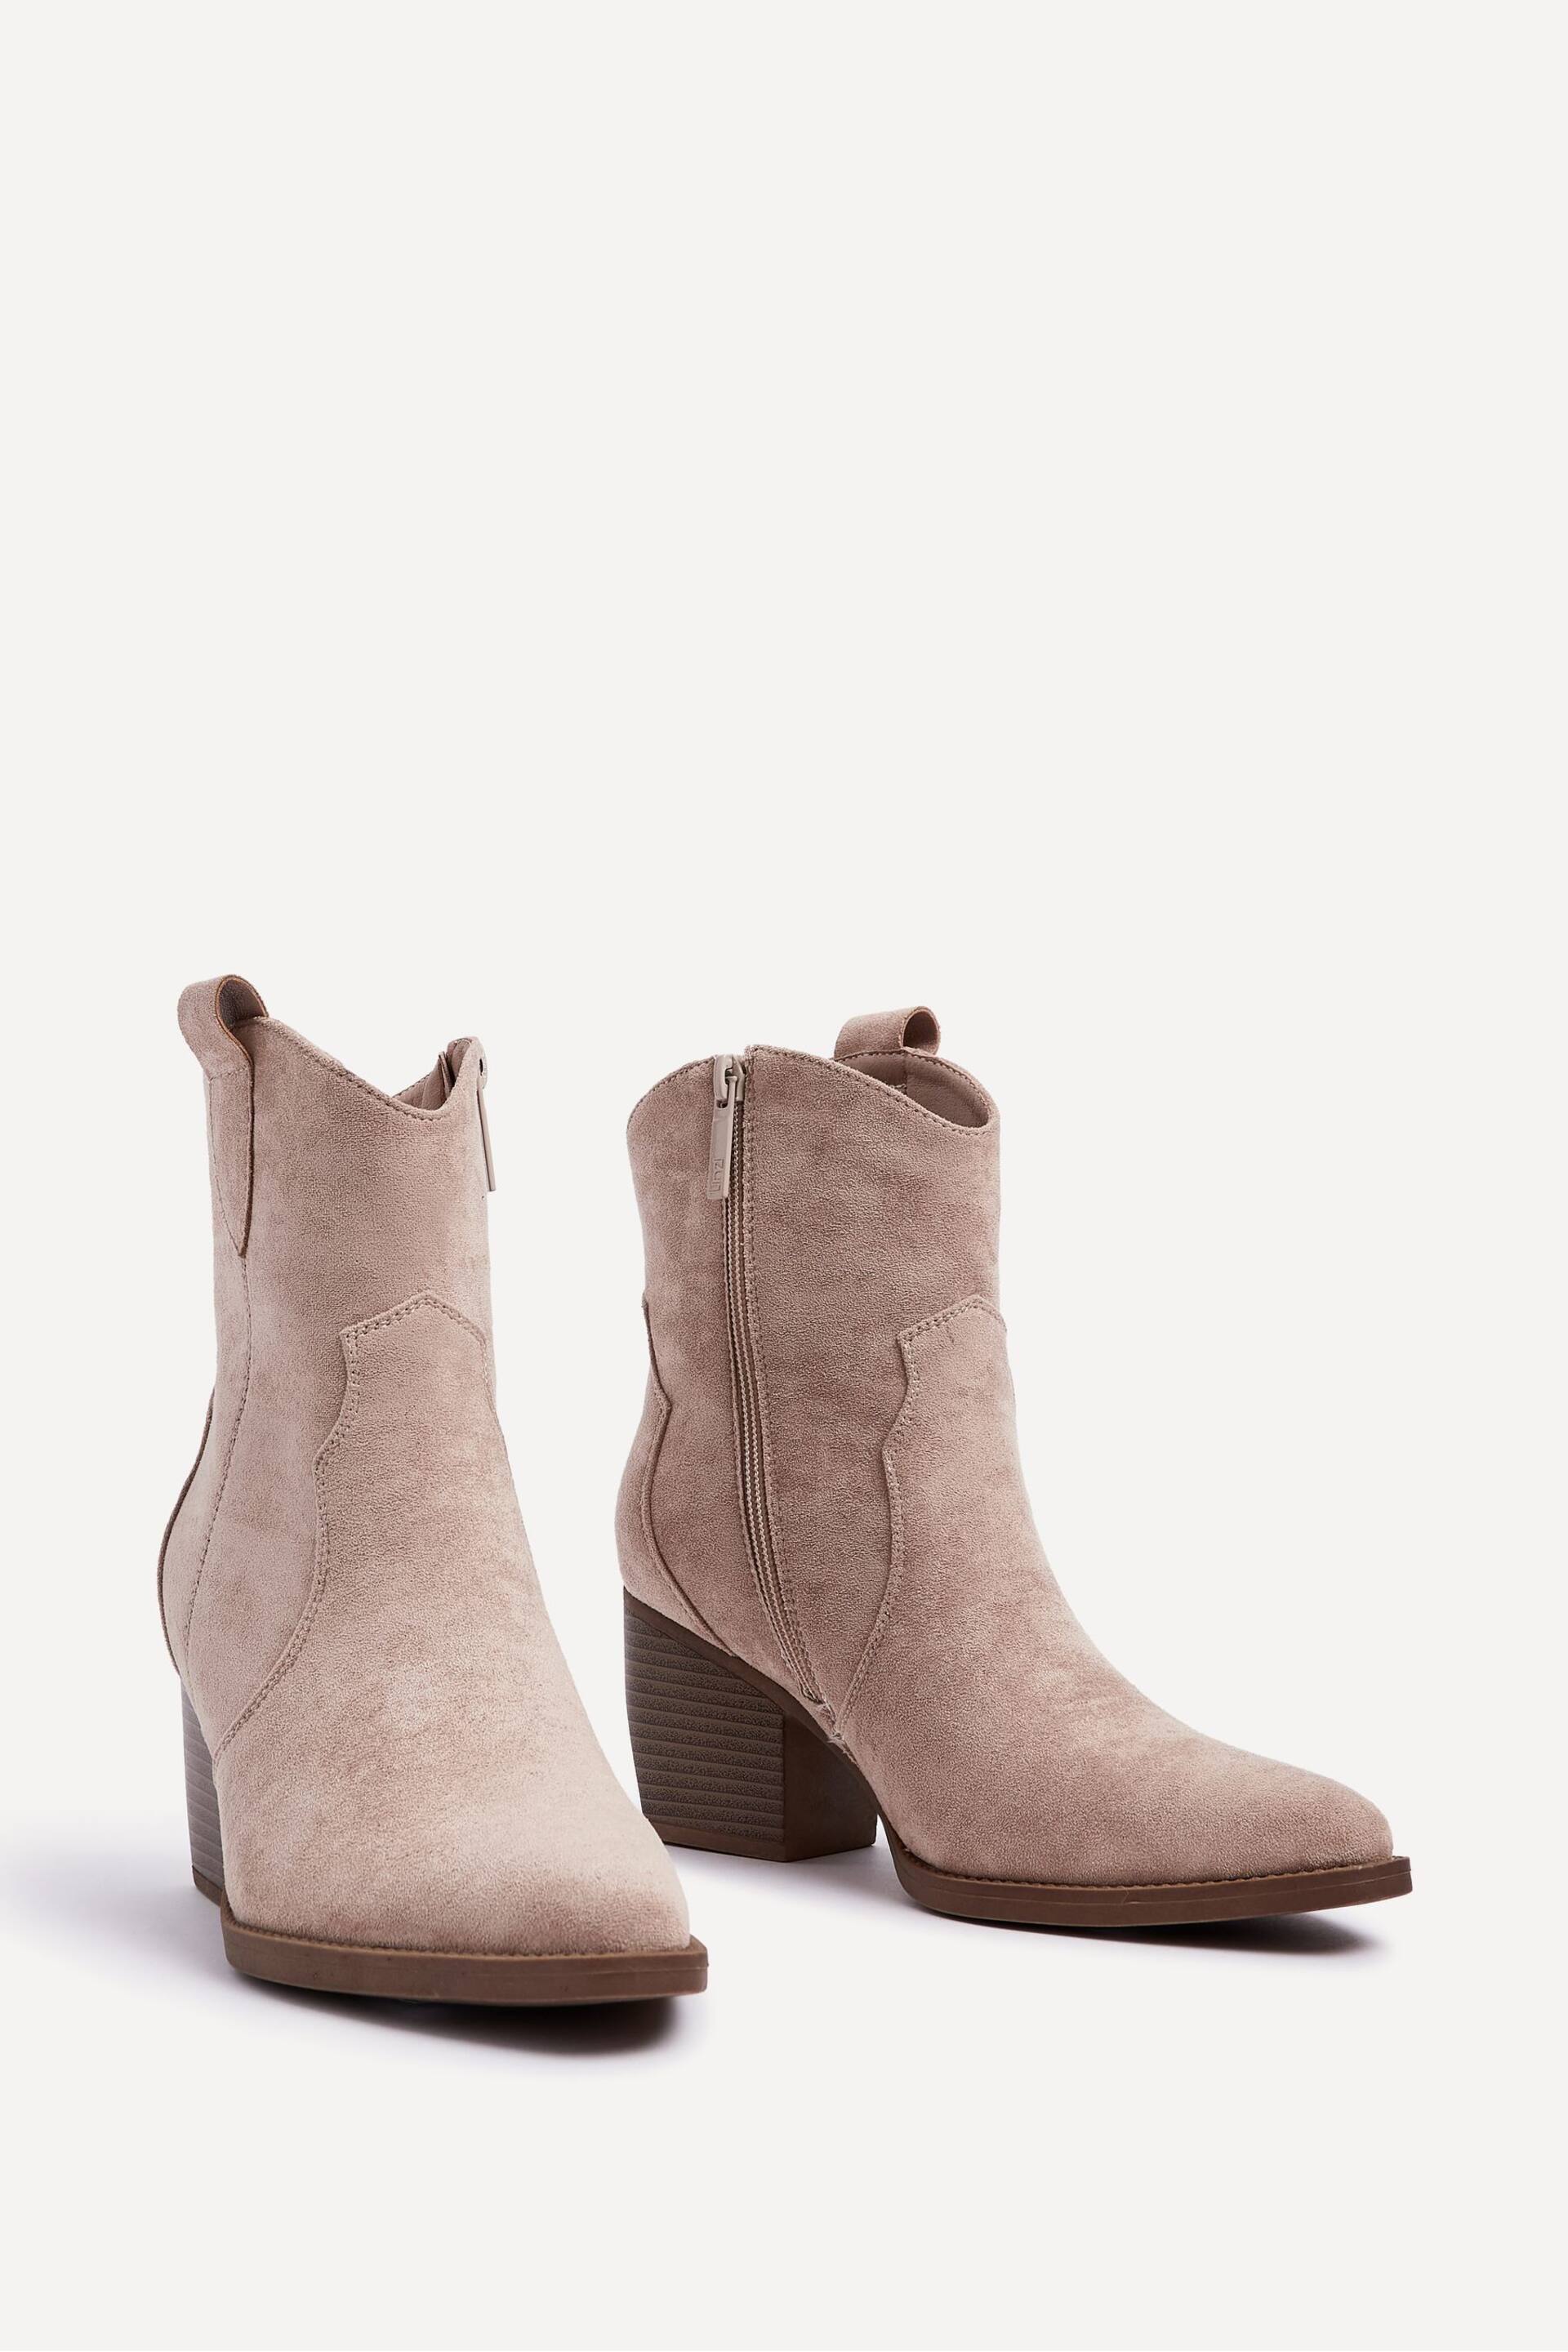 Linzi Natural Jessie Suede Western Ankle Boots - Image 3 of 5